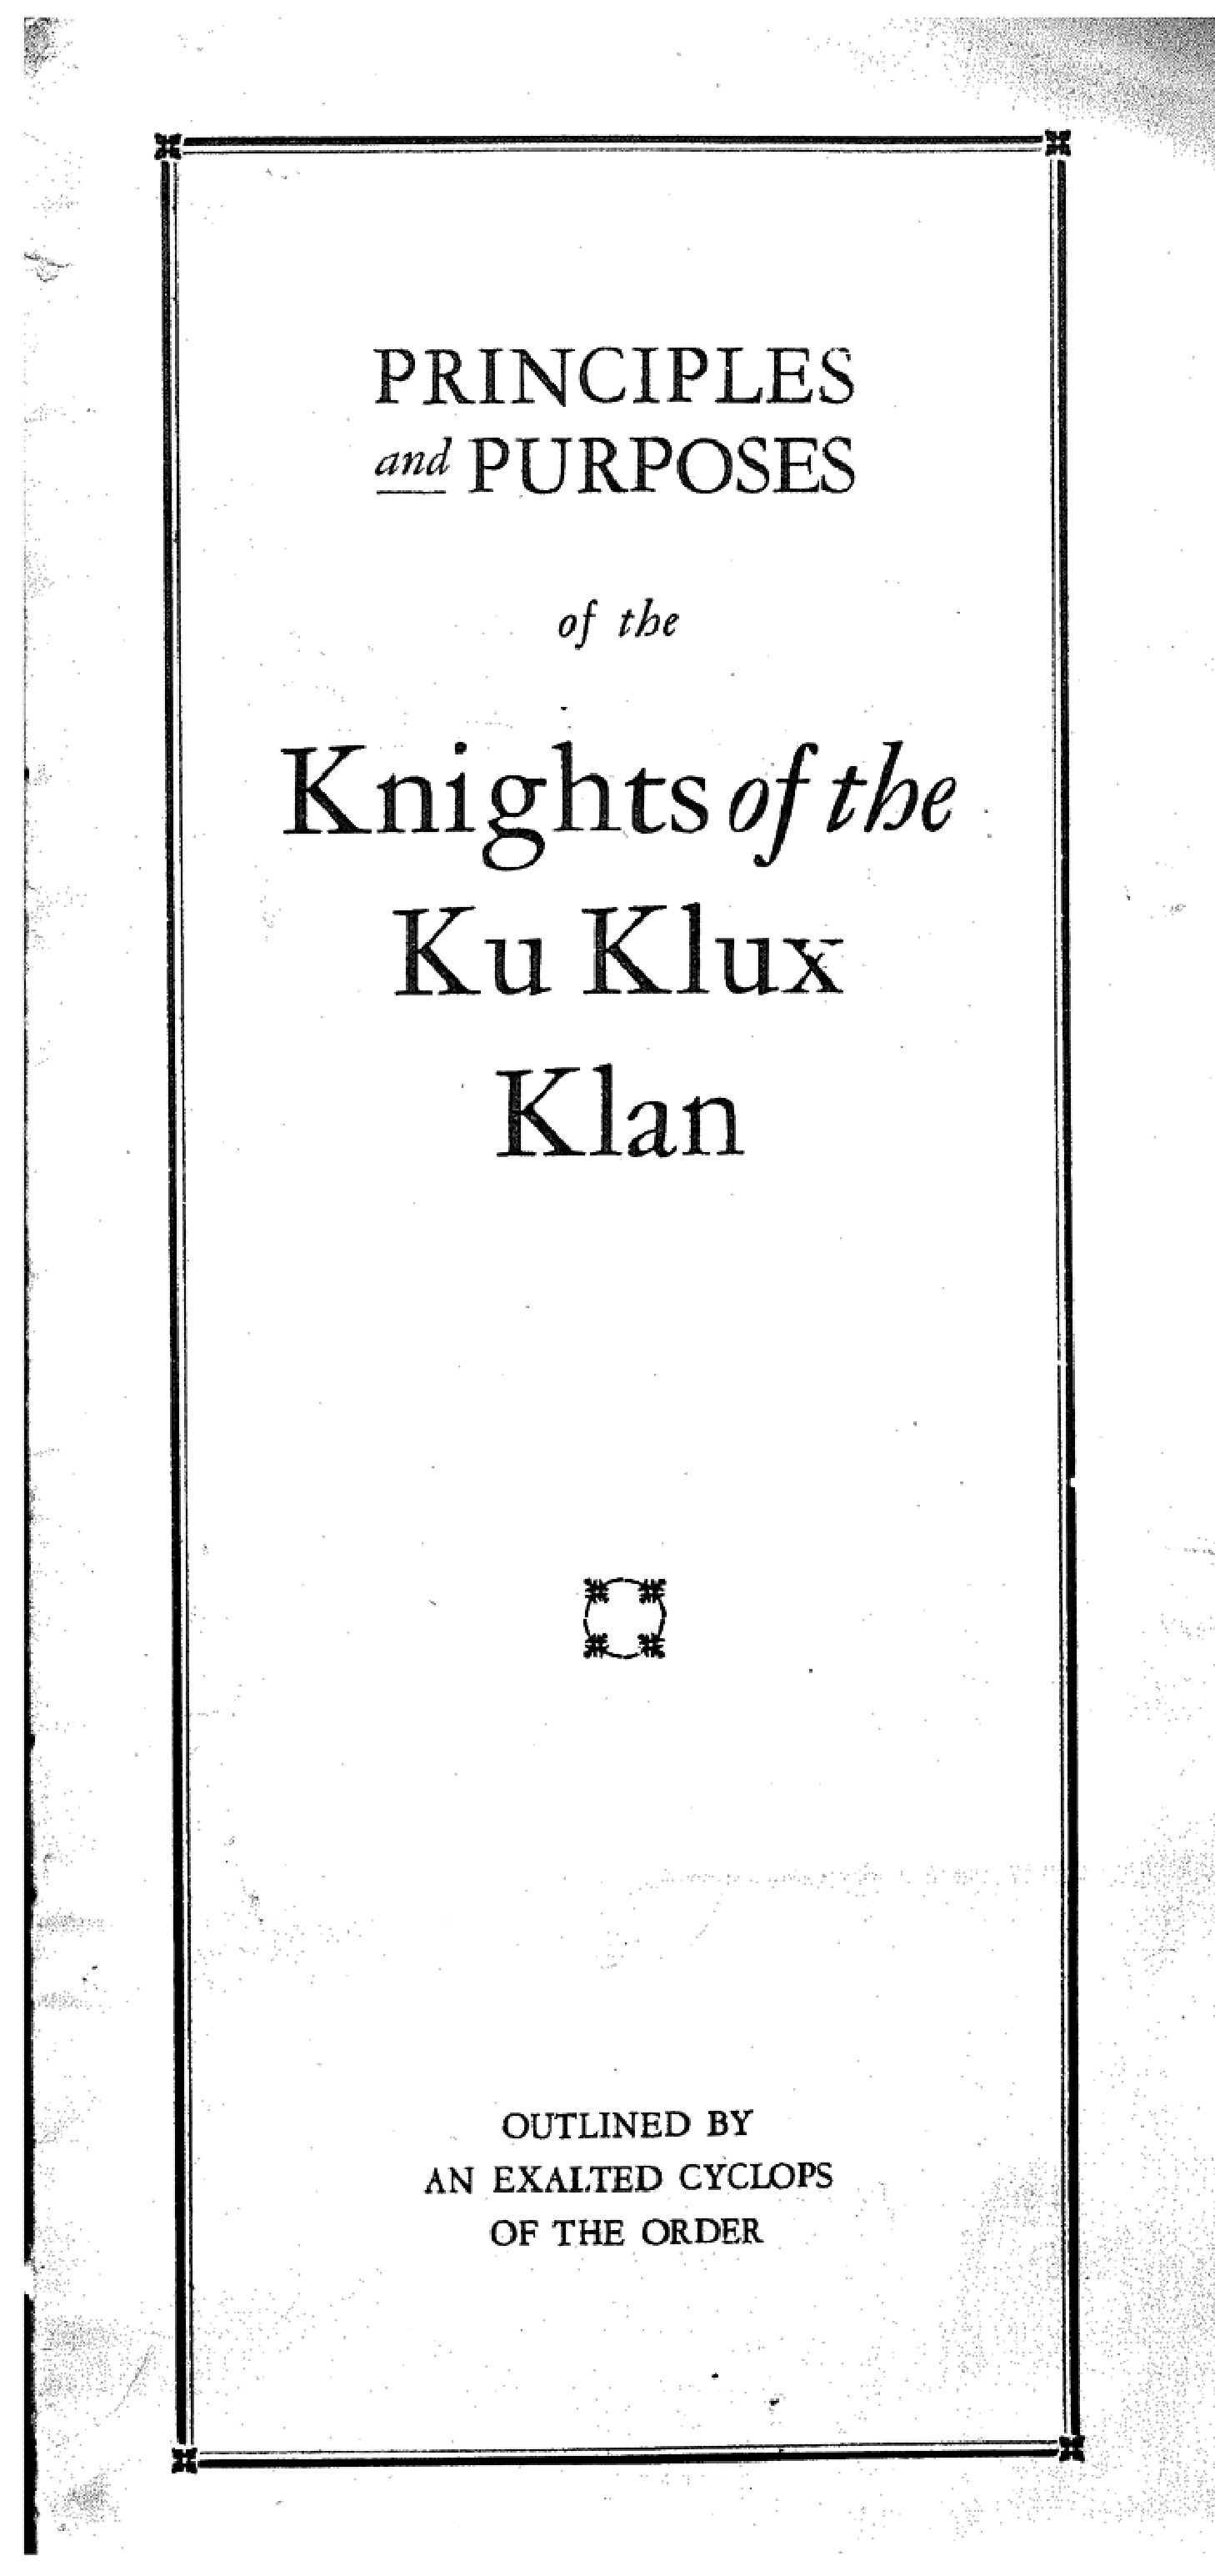 Principles and Purposes of the Knights of the KKK